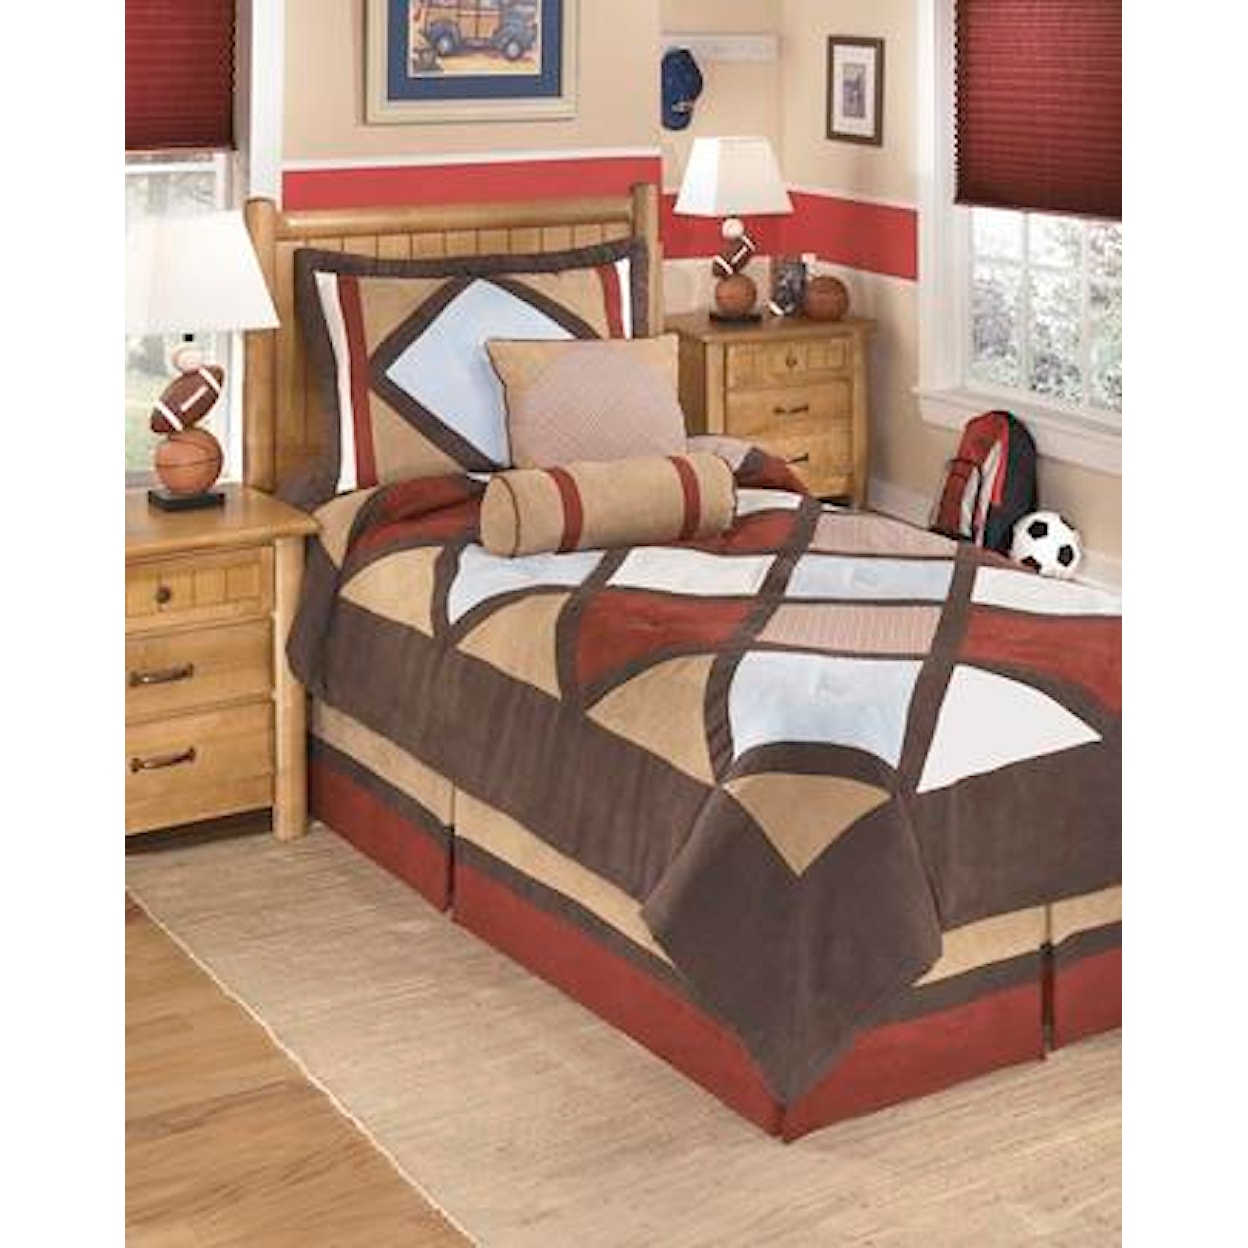 Ashley Furniture Signature Design Bedding Sets Twin Academy Multi Top of Bed Set